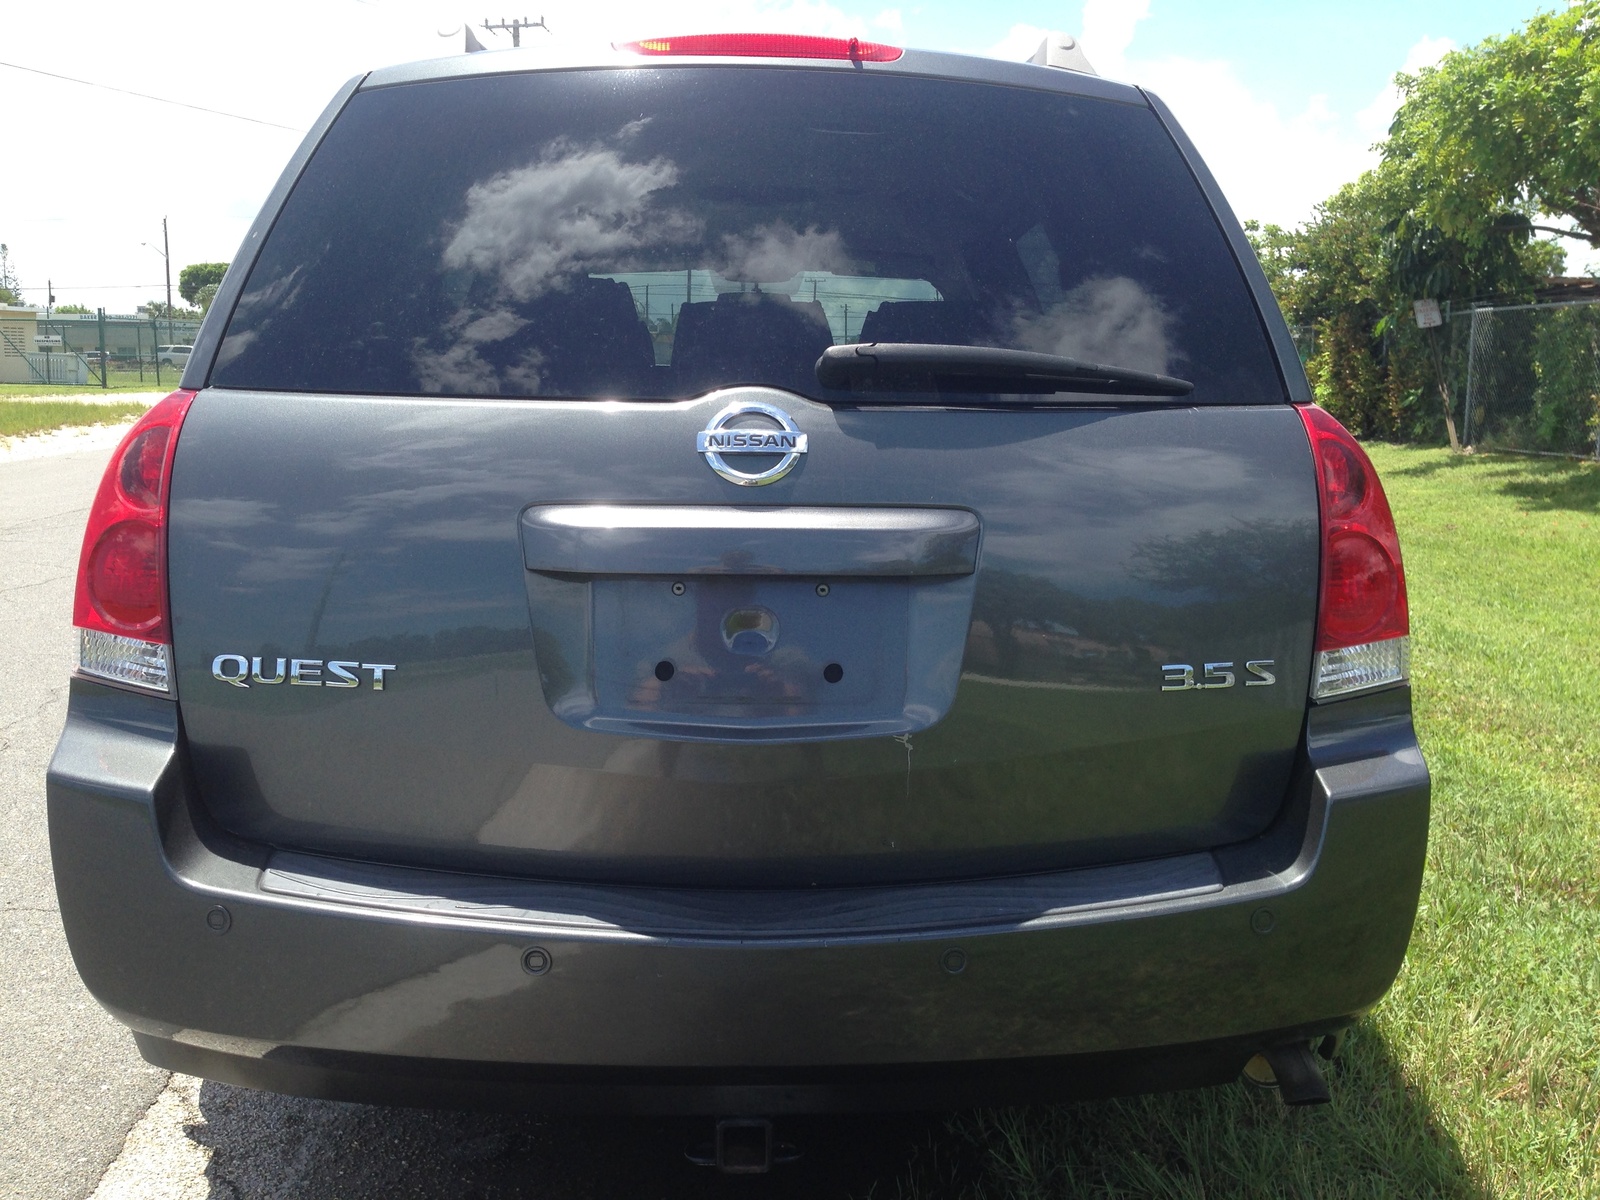 2006 Nissan quest special edition review #2